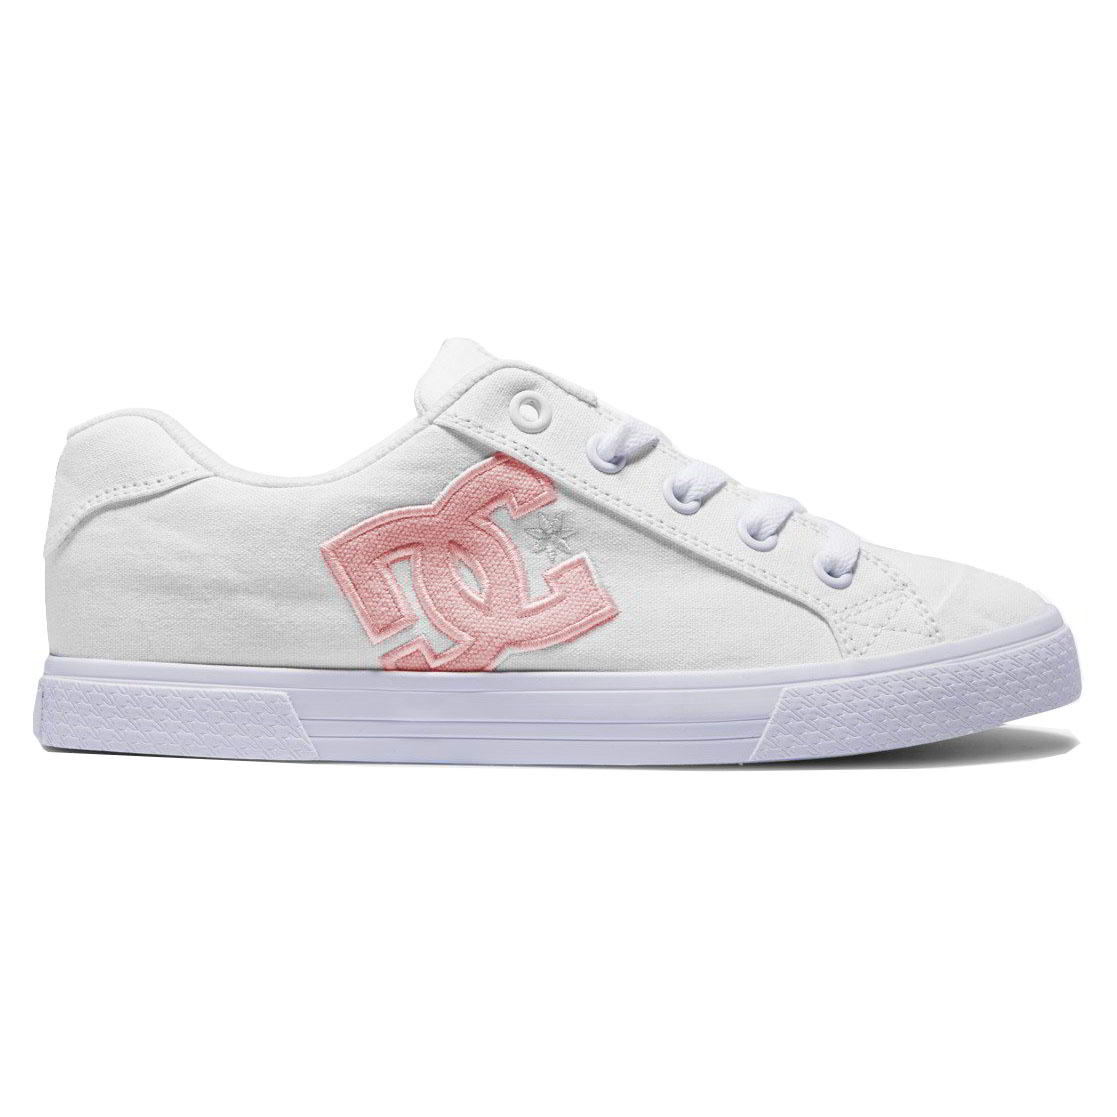 DC Womens Chelsea Skate Shoes Trainers White Pink - UK 4 2951